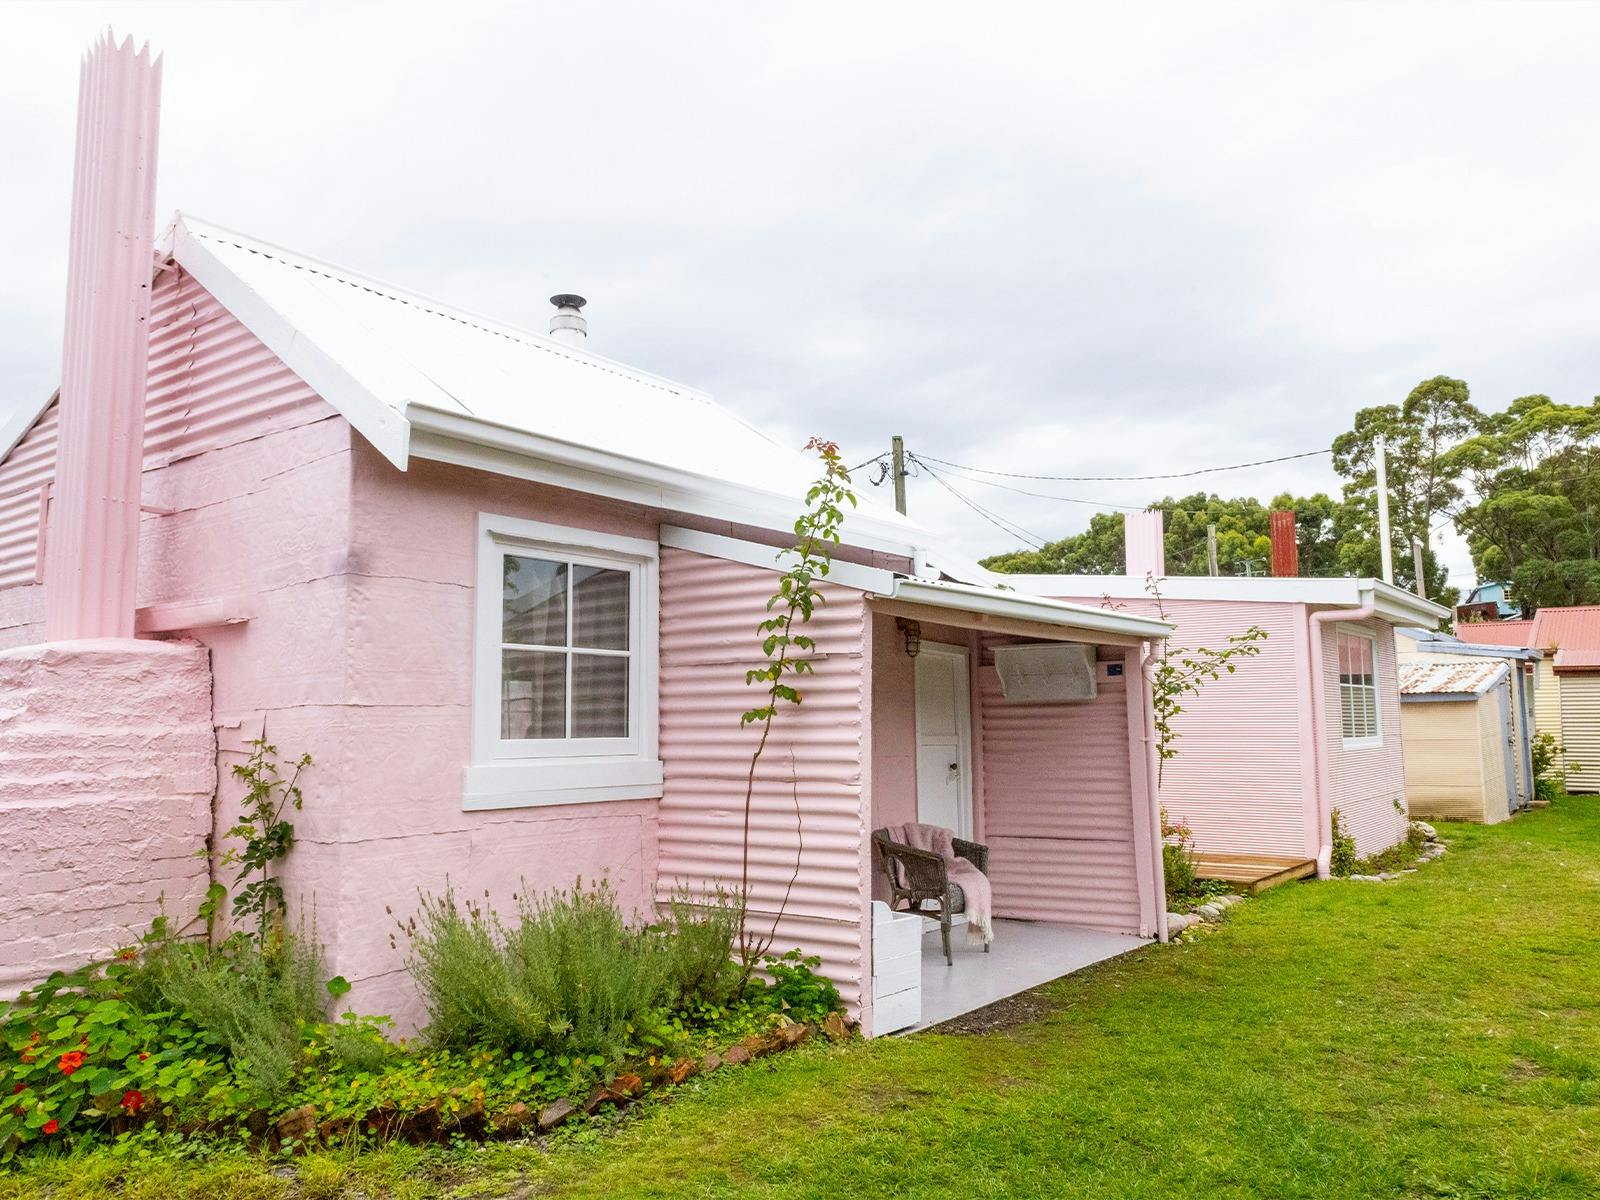 A pink shack with a white roof and windows